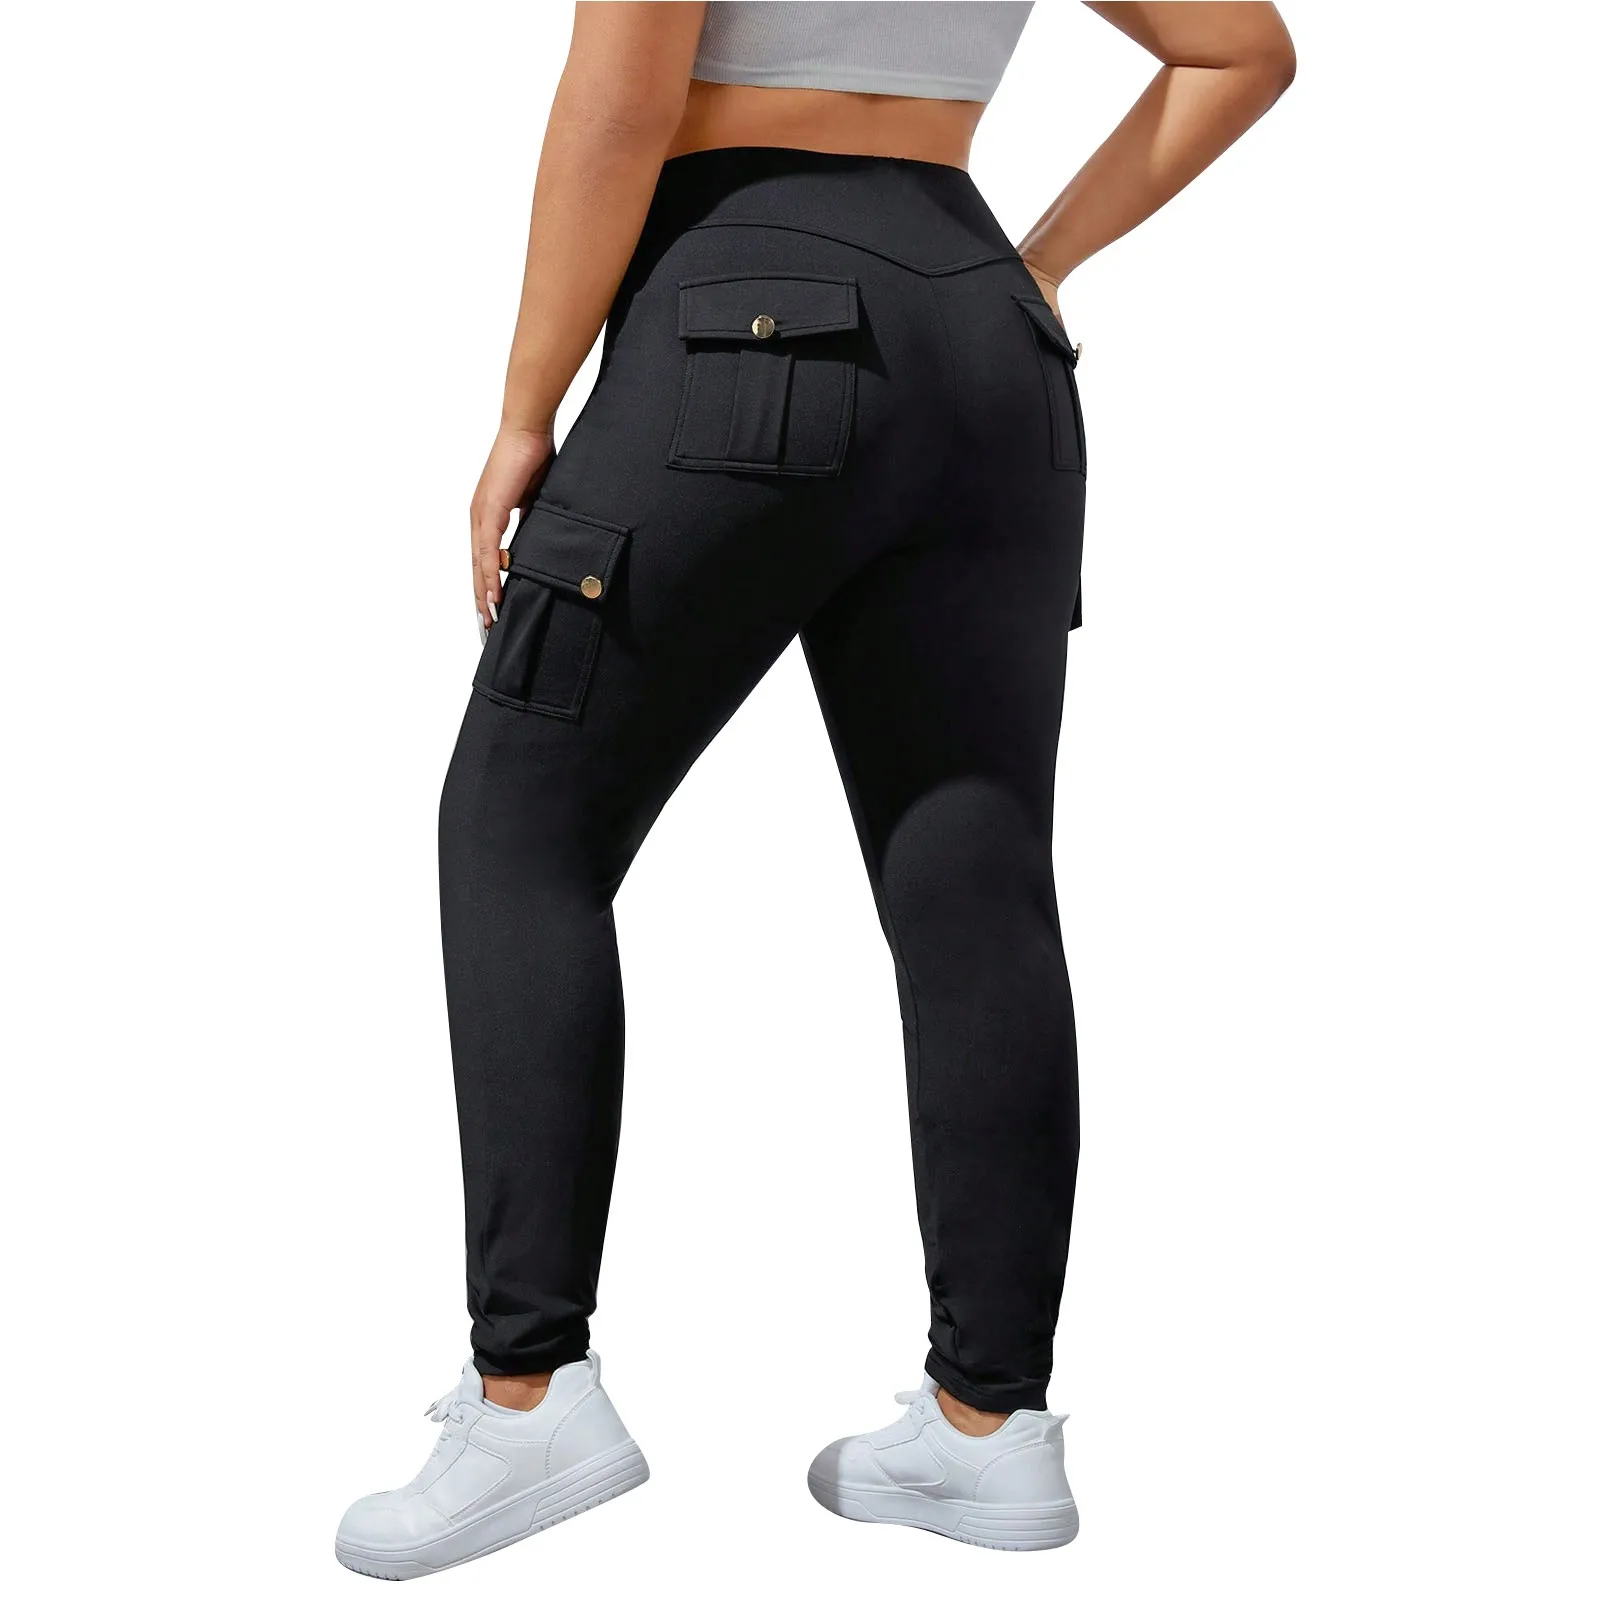 Wide Waistband Solid Phone Pocket Leggings